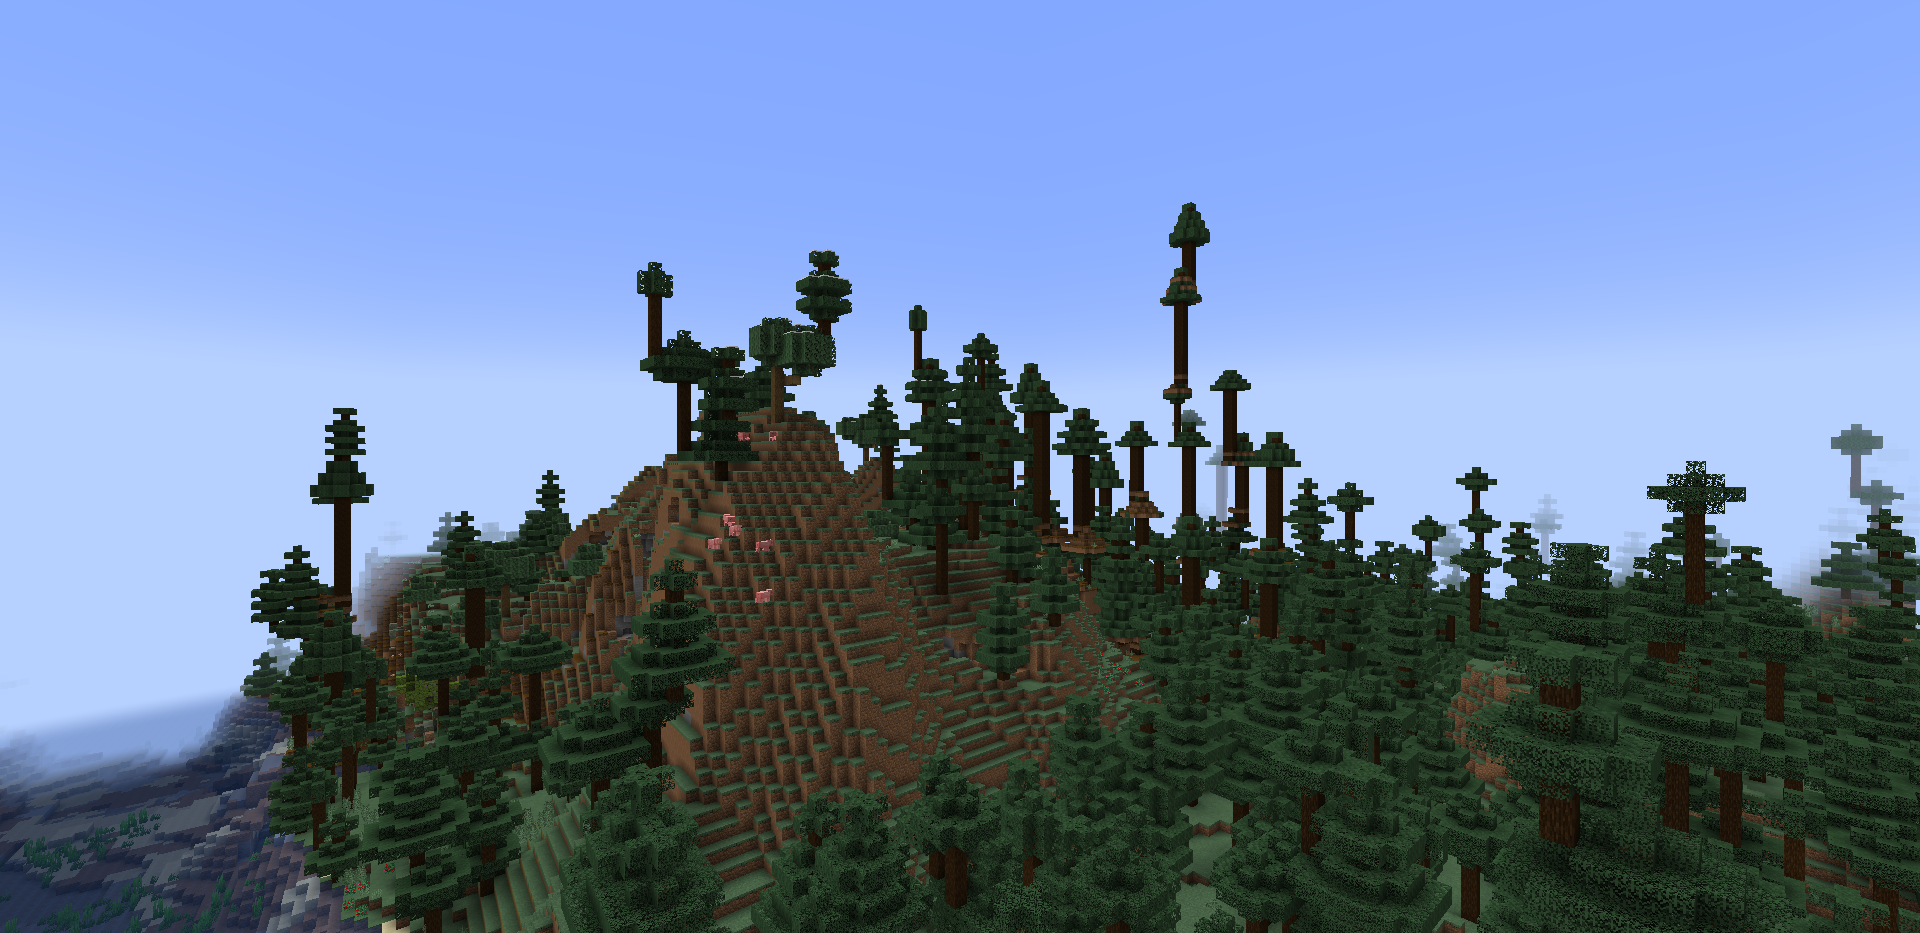 Without the normal limitations, trees can now grow on other trees!